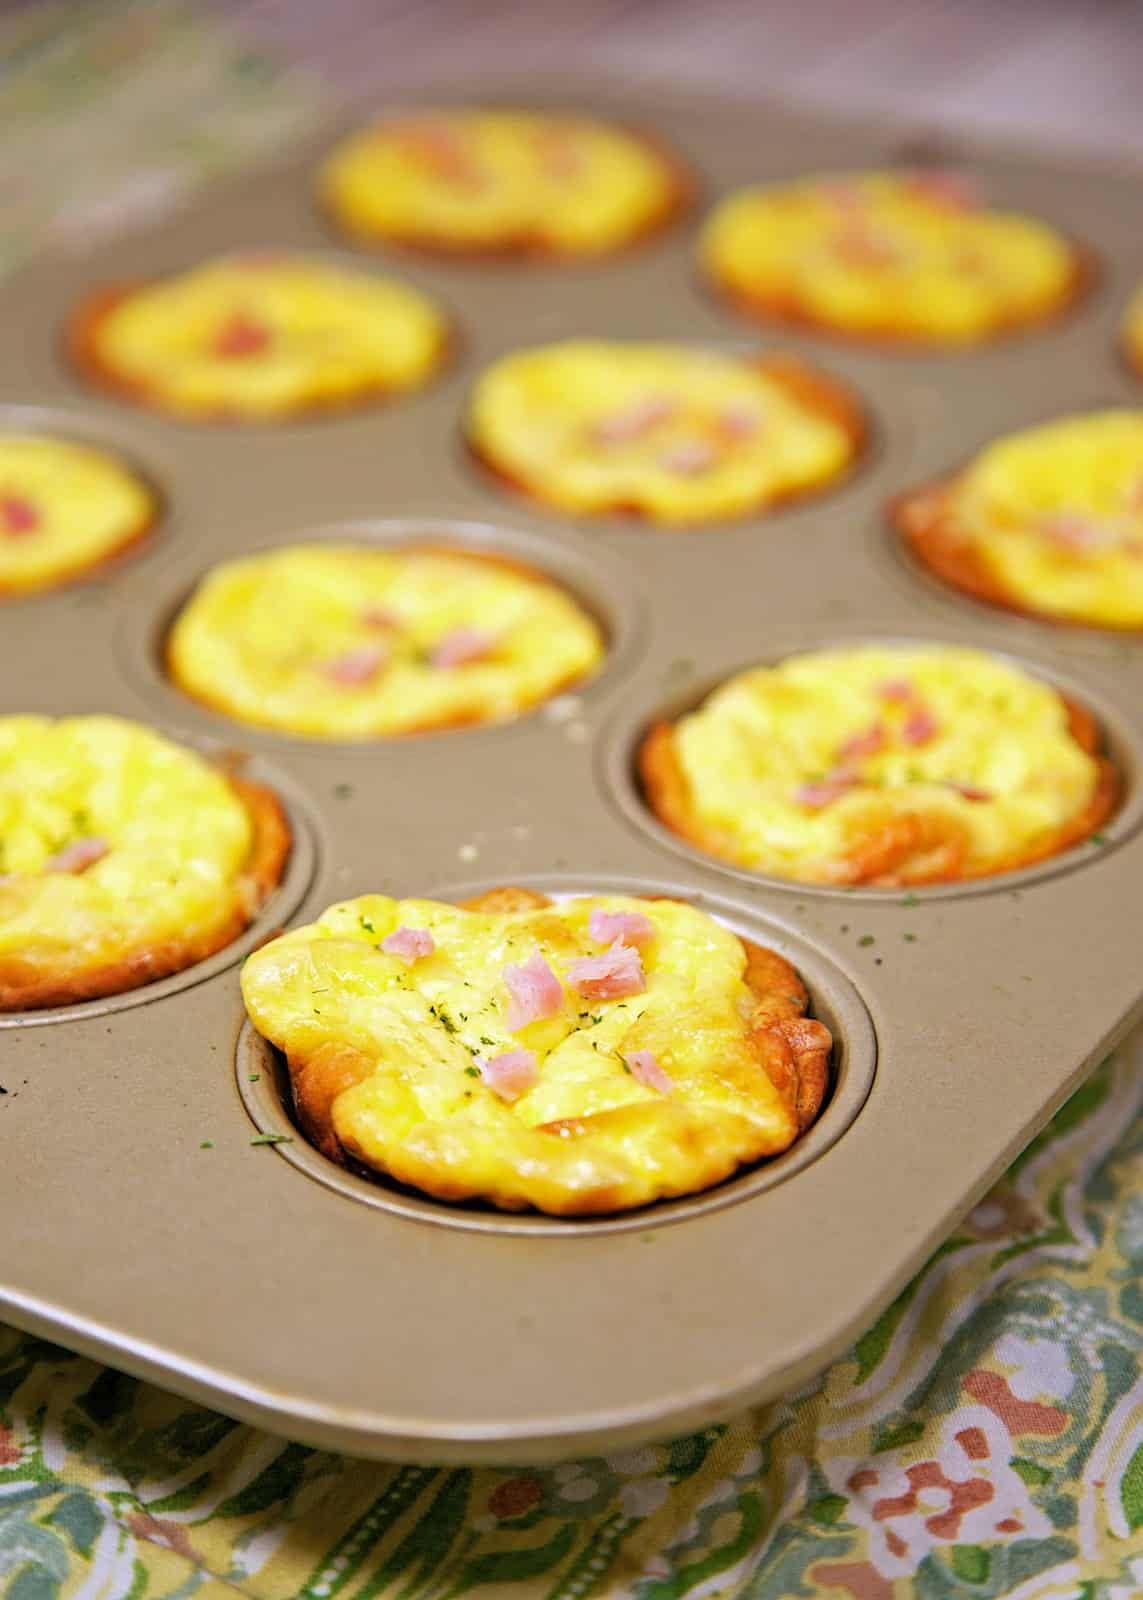 Ham & Cheese Biscuit Quiches Recipe - ham and cheese quiche baked in a biscuit crust. Great way to use up leftover holiday ham! Freeze leftovers for a quick meal later!!